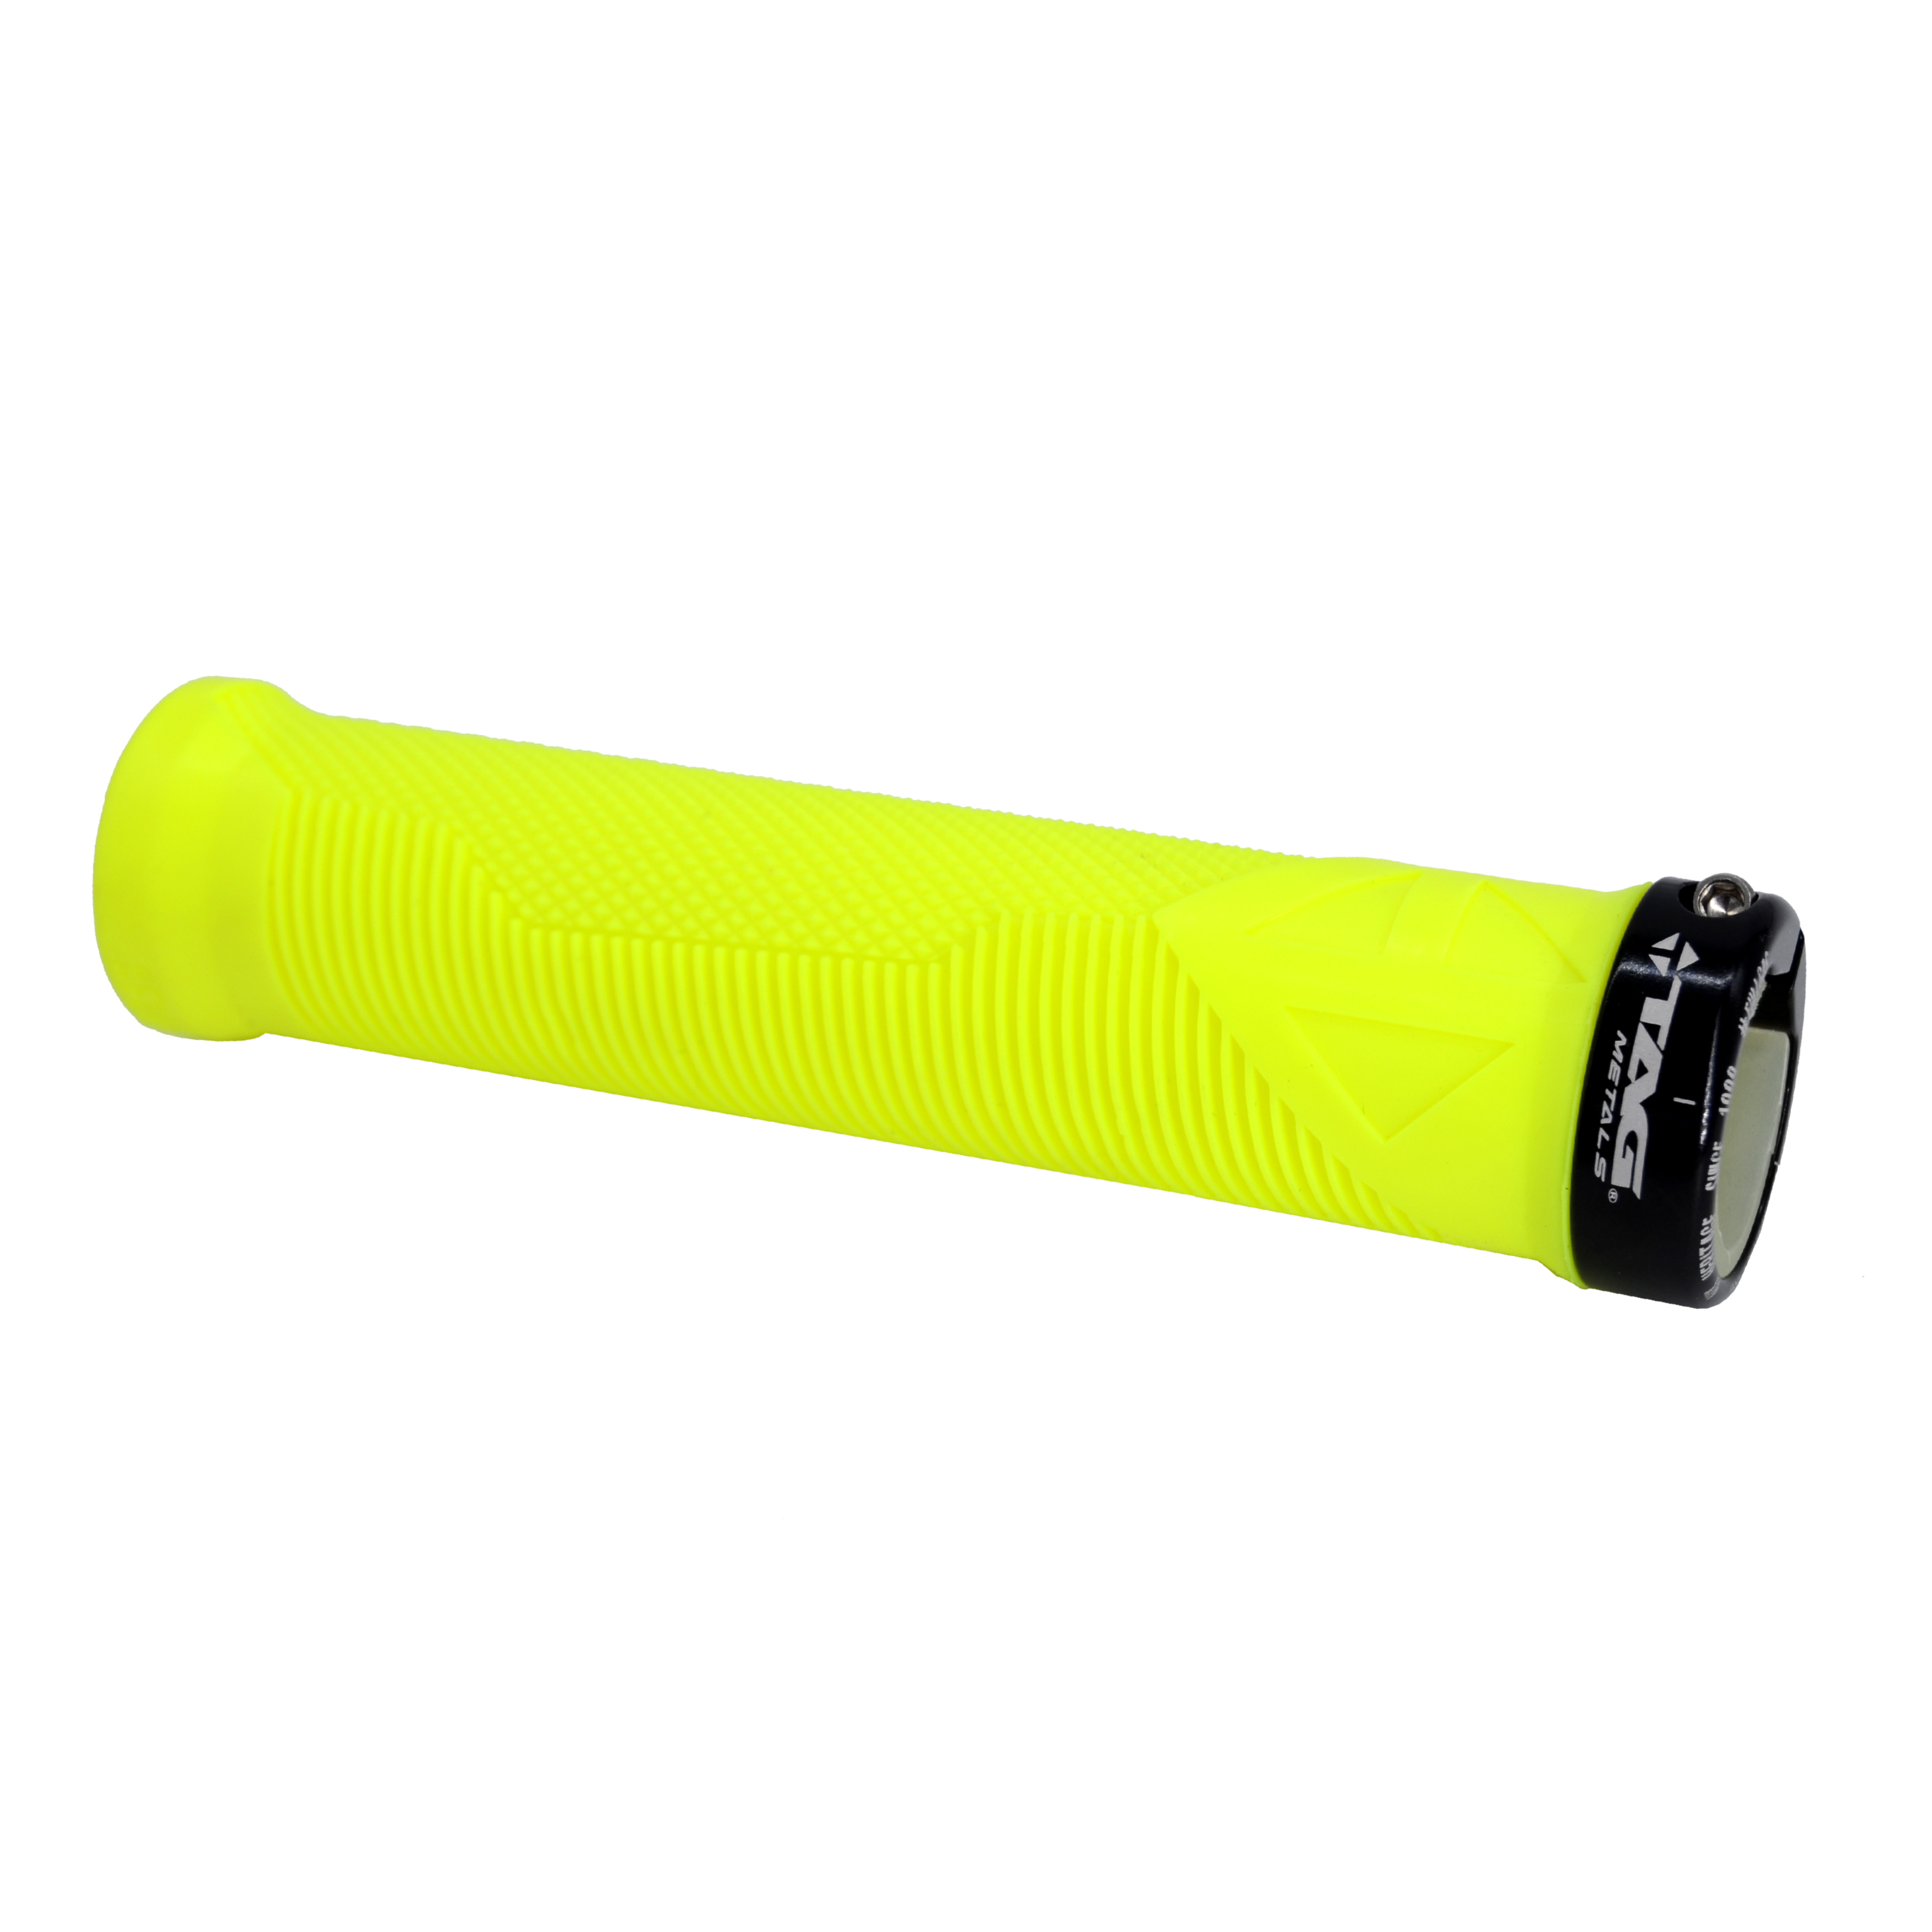 T3001-01-000 TAG Metals  T1 Section Grip  Yellow.jpg